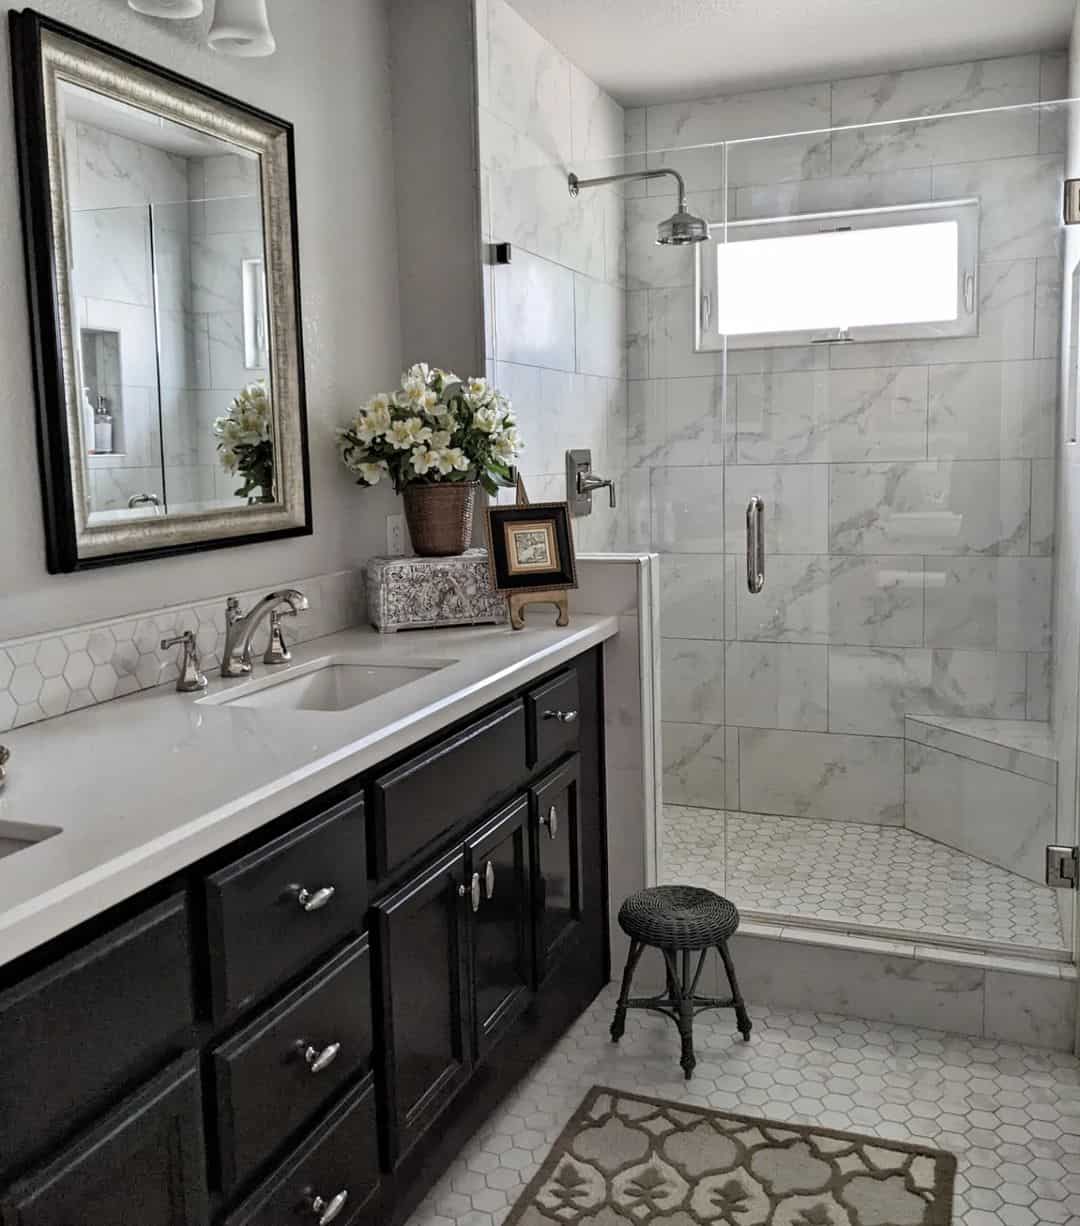 Mixed Marble Tiling for a Bathroom Shower - Soul & Lane